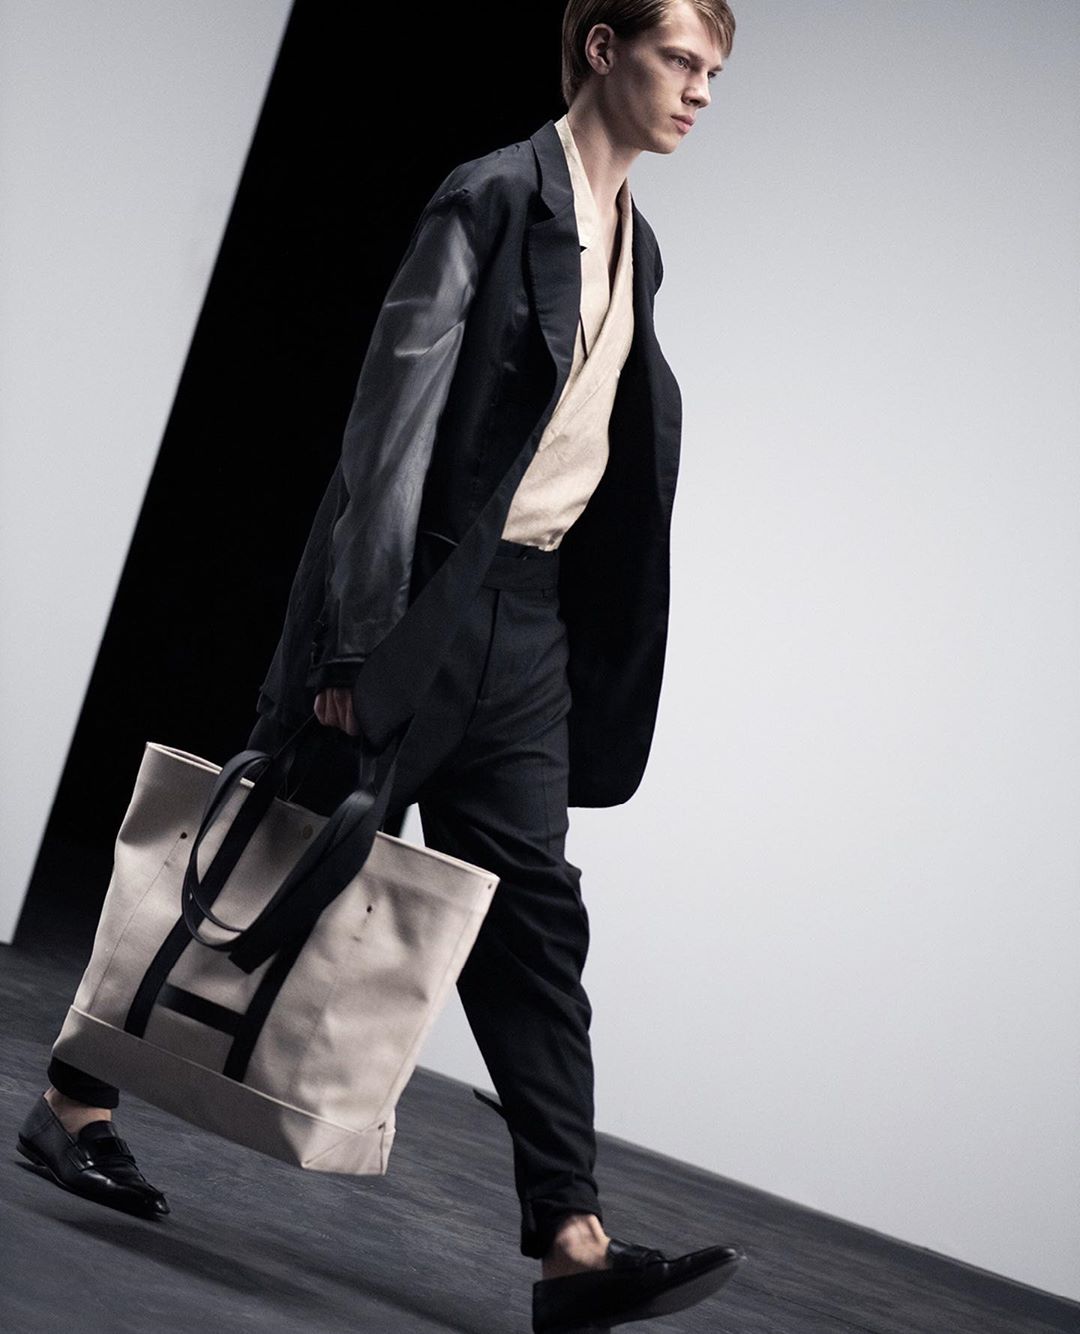 alfreddunhill - SPRING SUMMER 2021 SHOW⁠⠀
THE RUNWAY⁠⠀
#dunhillSS21⁠⠀
⁠⠀
Celebrating the new Utility large tote. Look 29 features the silk reverse detail contrast jacket worn over a linen reverse deta...